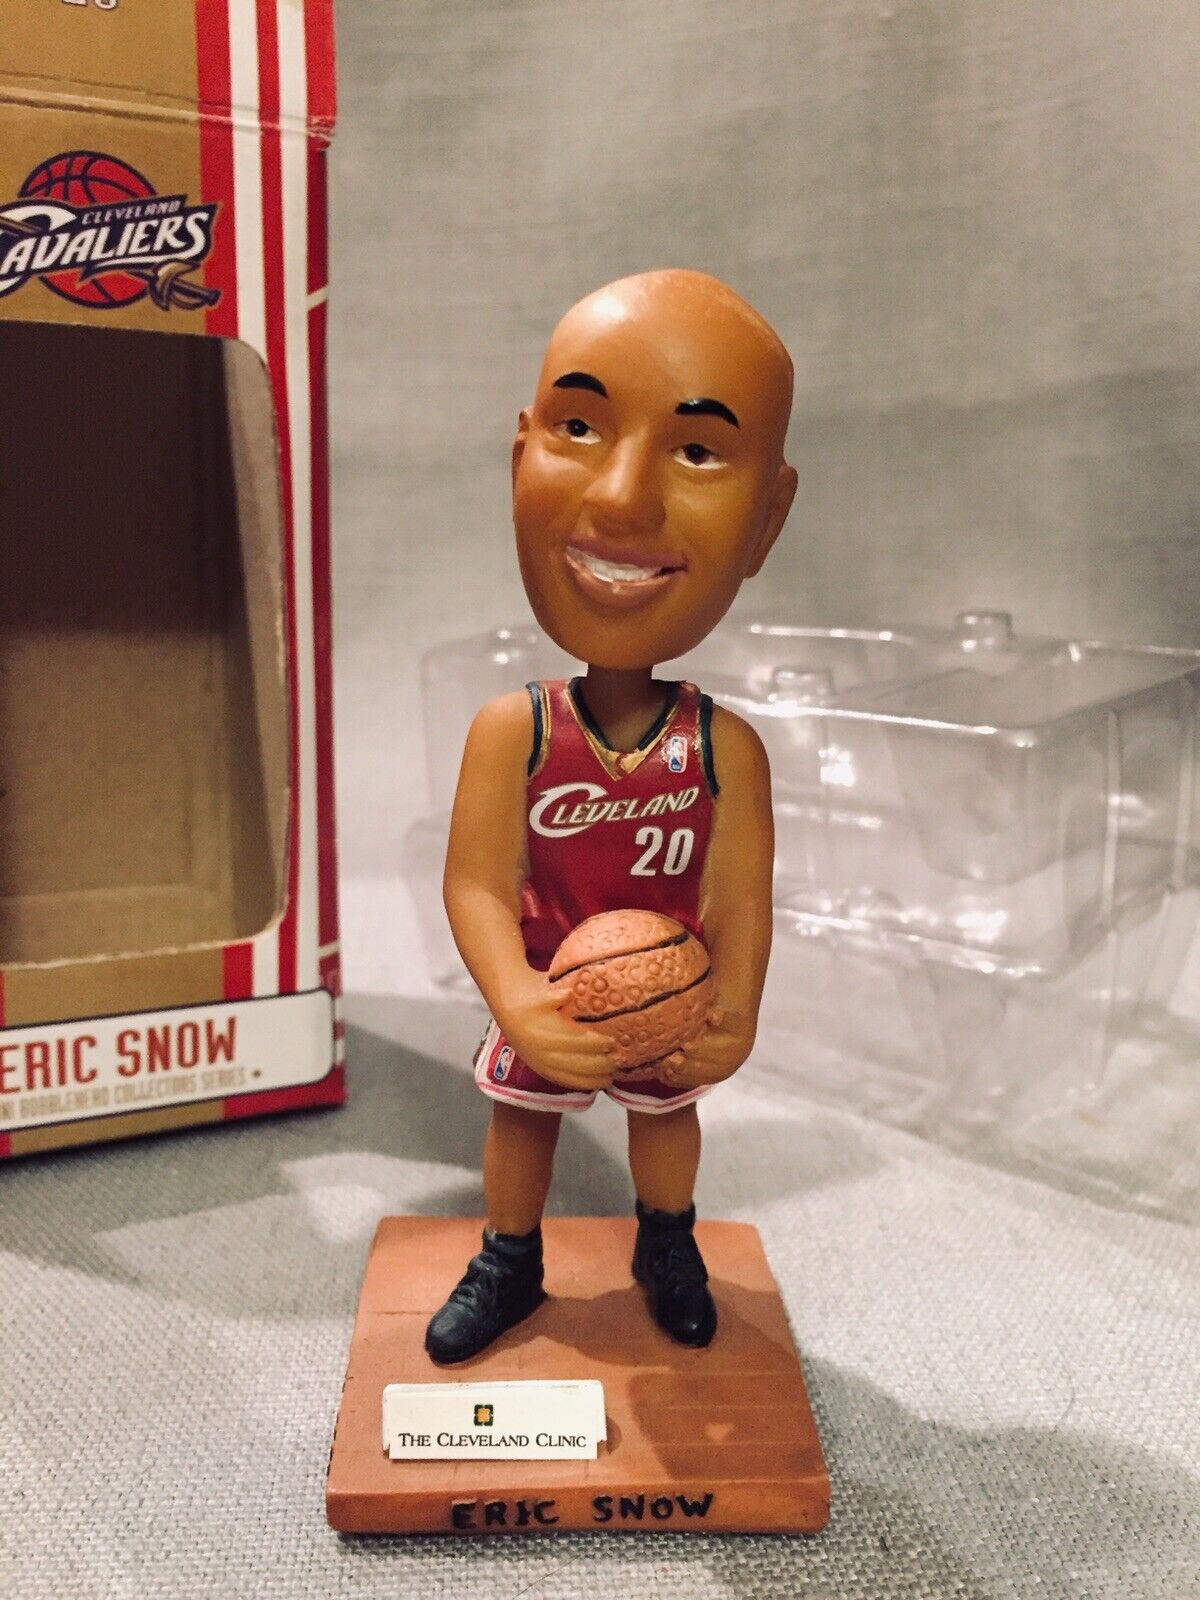 Cleveland Cavaliers Mini Bobblehead Collector #3 Eric Snow Ad Clev Clinic Sports